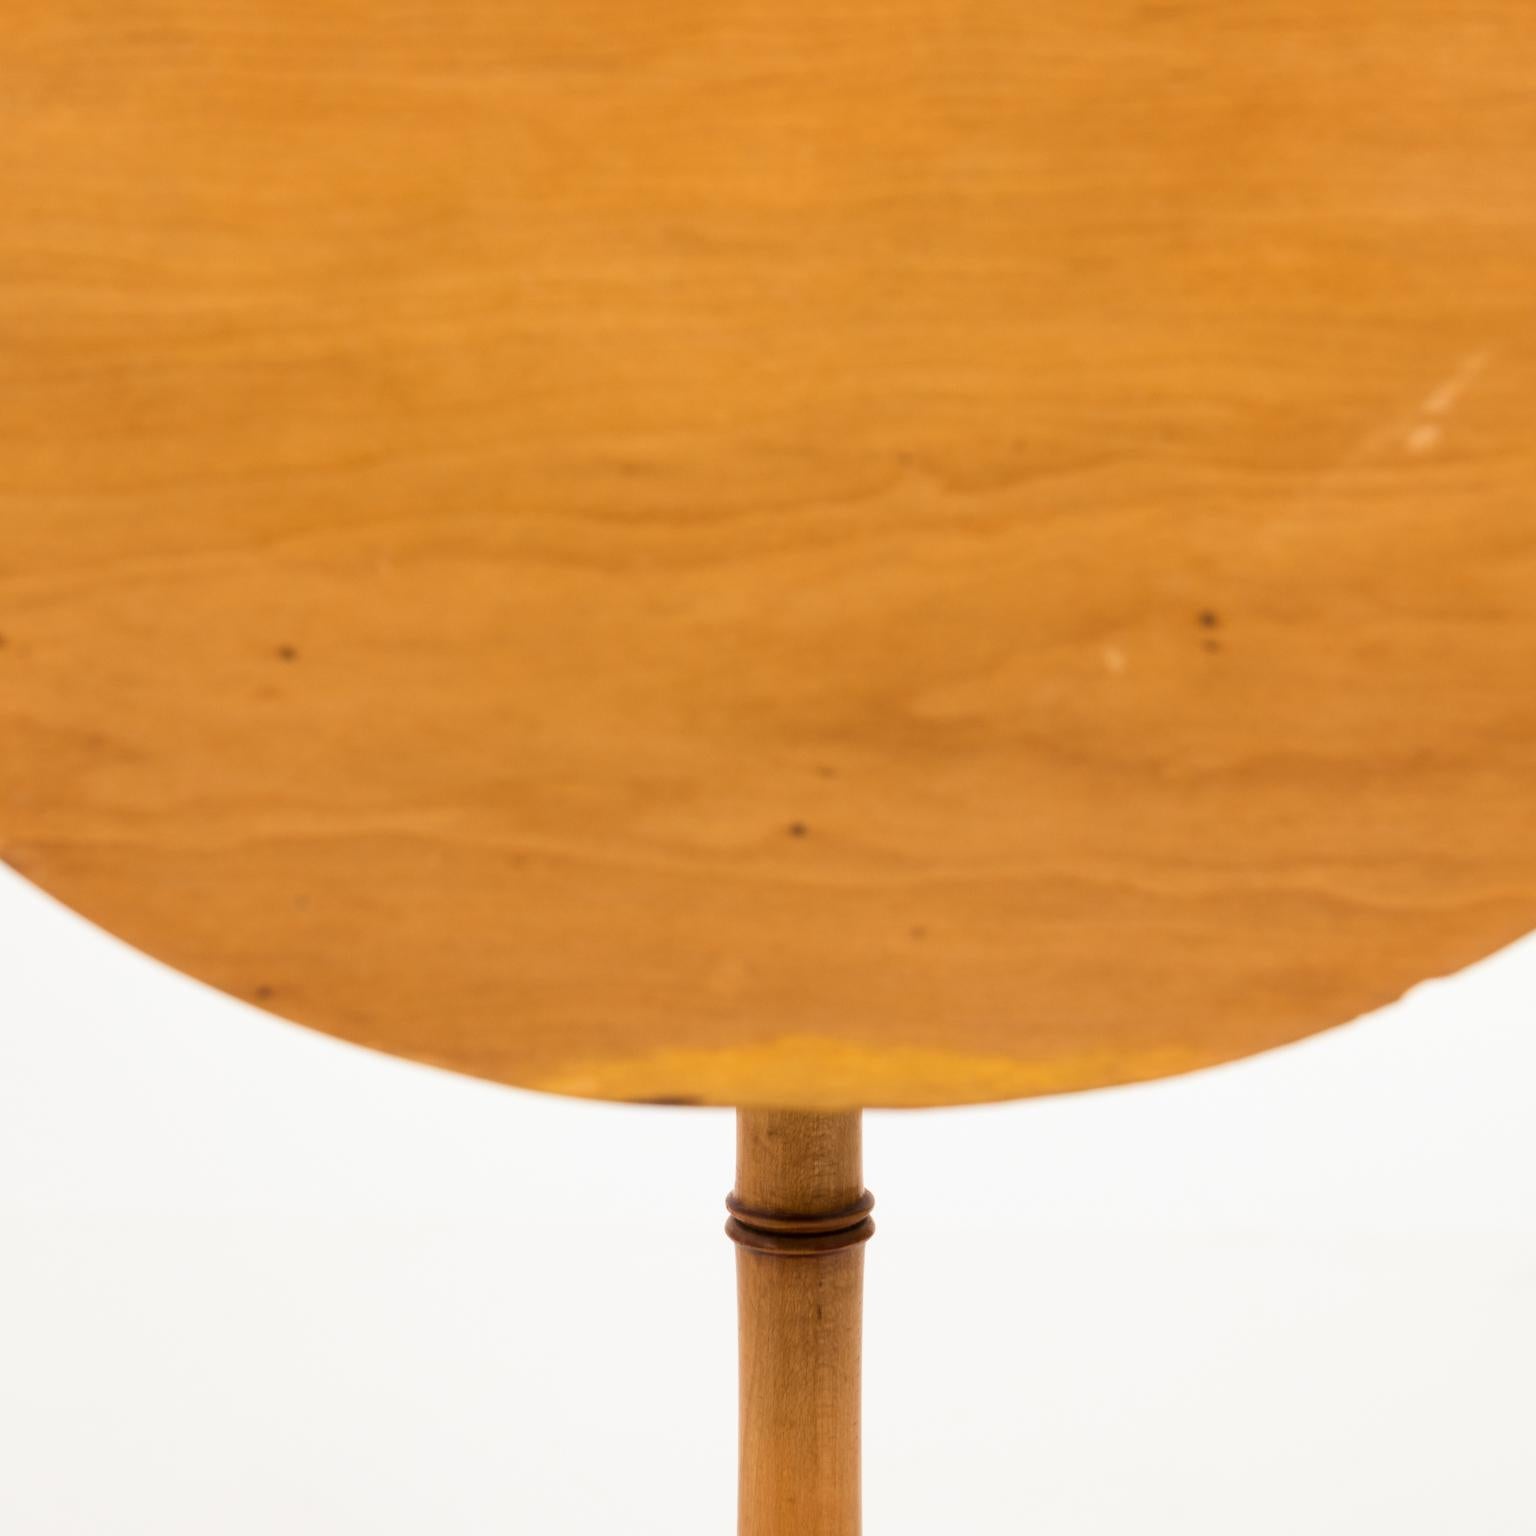 Mid-20th century faux bamboo drop-leaf clover shape side table with bottom shelf.
 